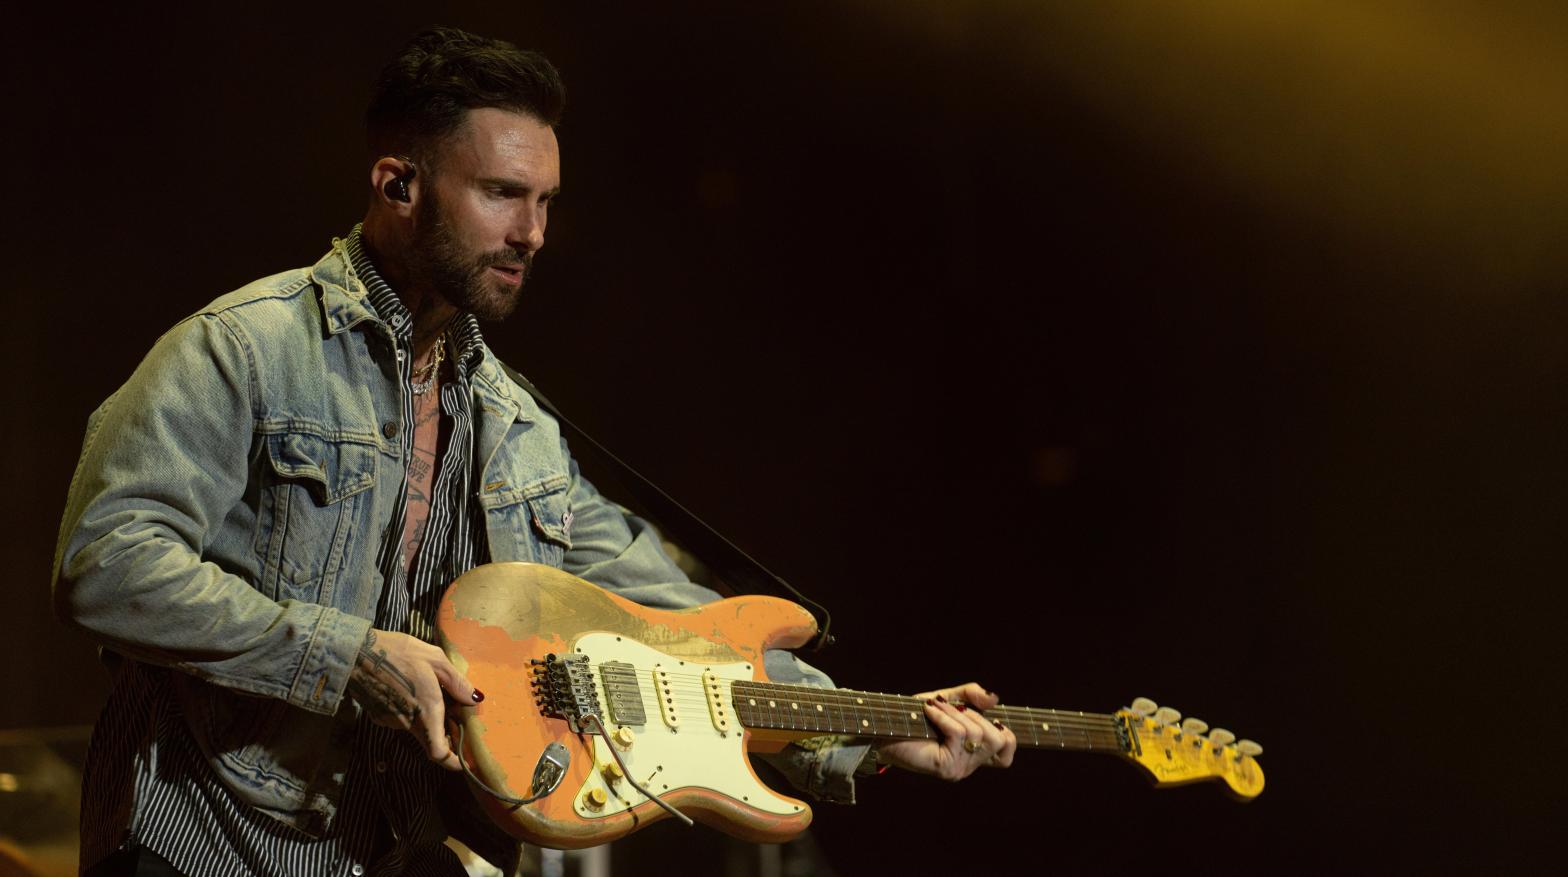 Adam Levine performs during the Maroon 5 show at Hayarkon Park on May 9, 2022 in Tel Aviv, Israel. (Photo: Shlomi Pinto, Getty Images)